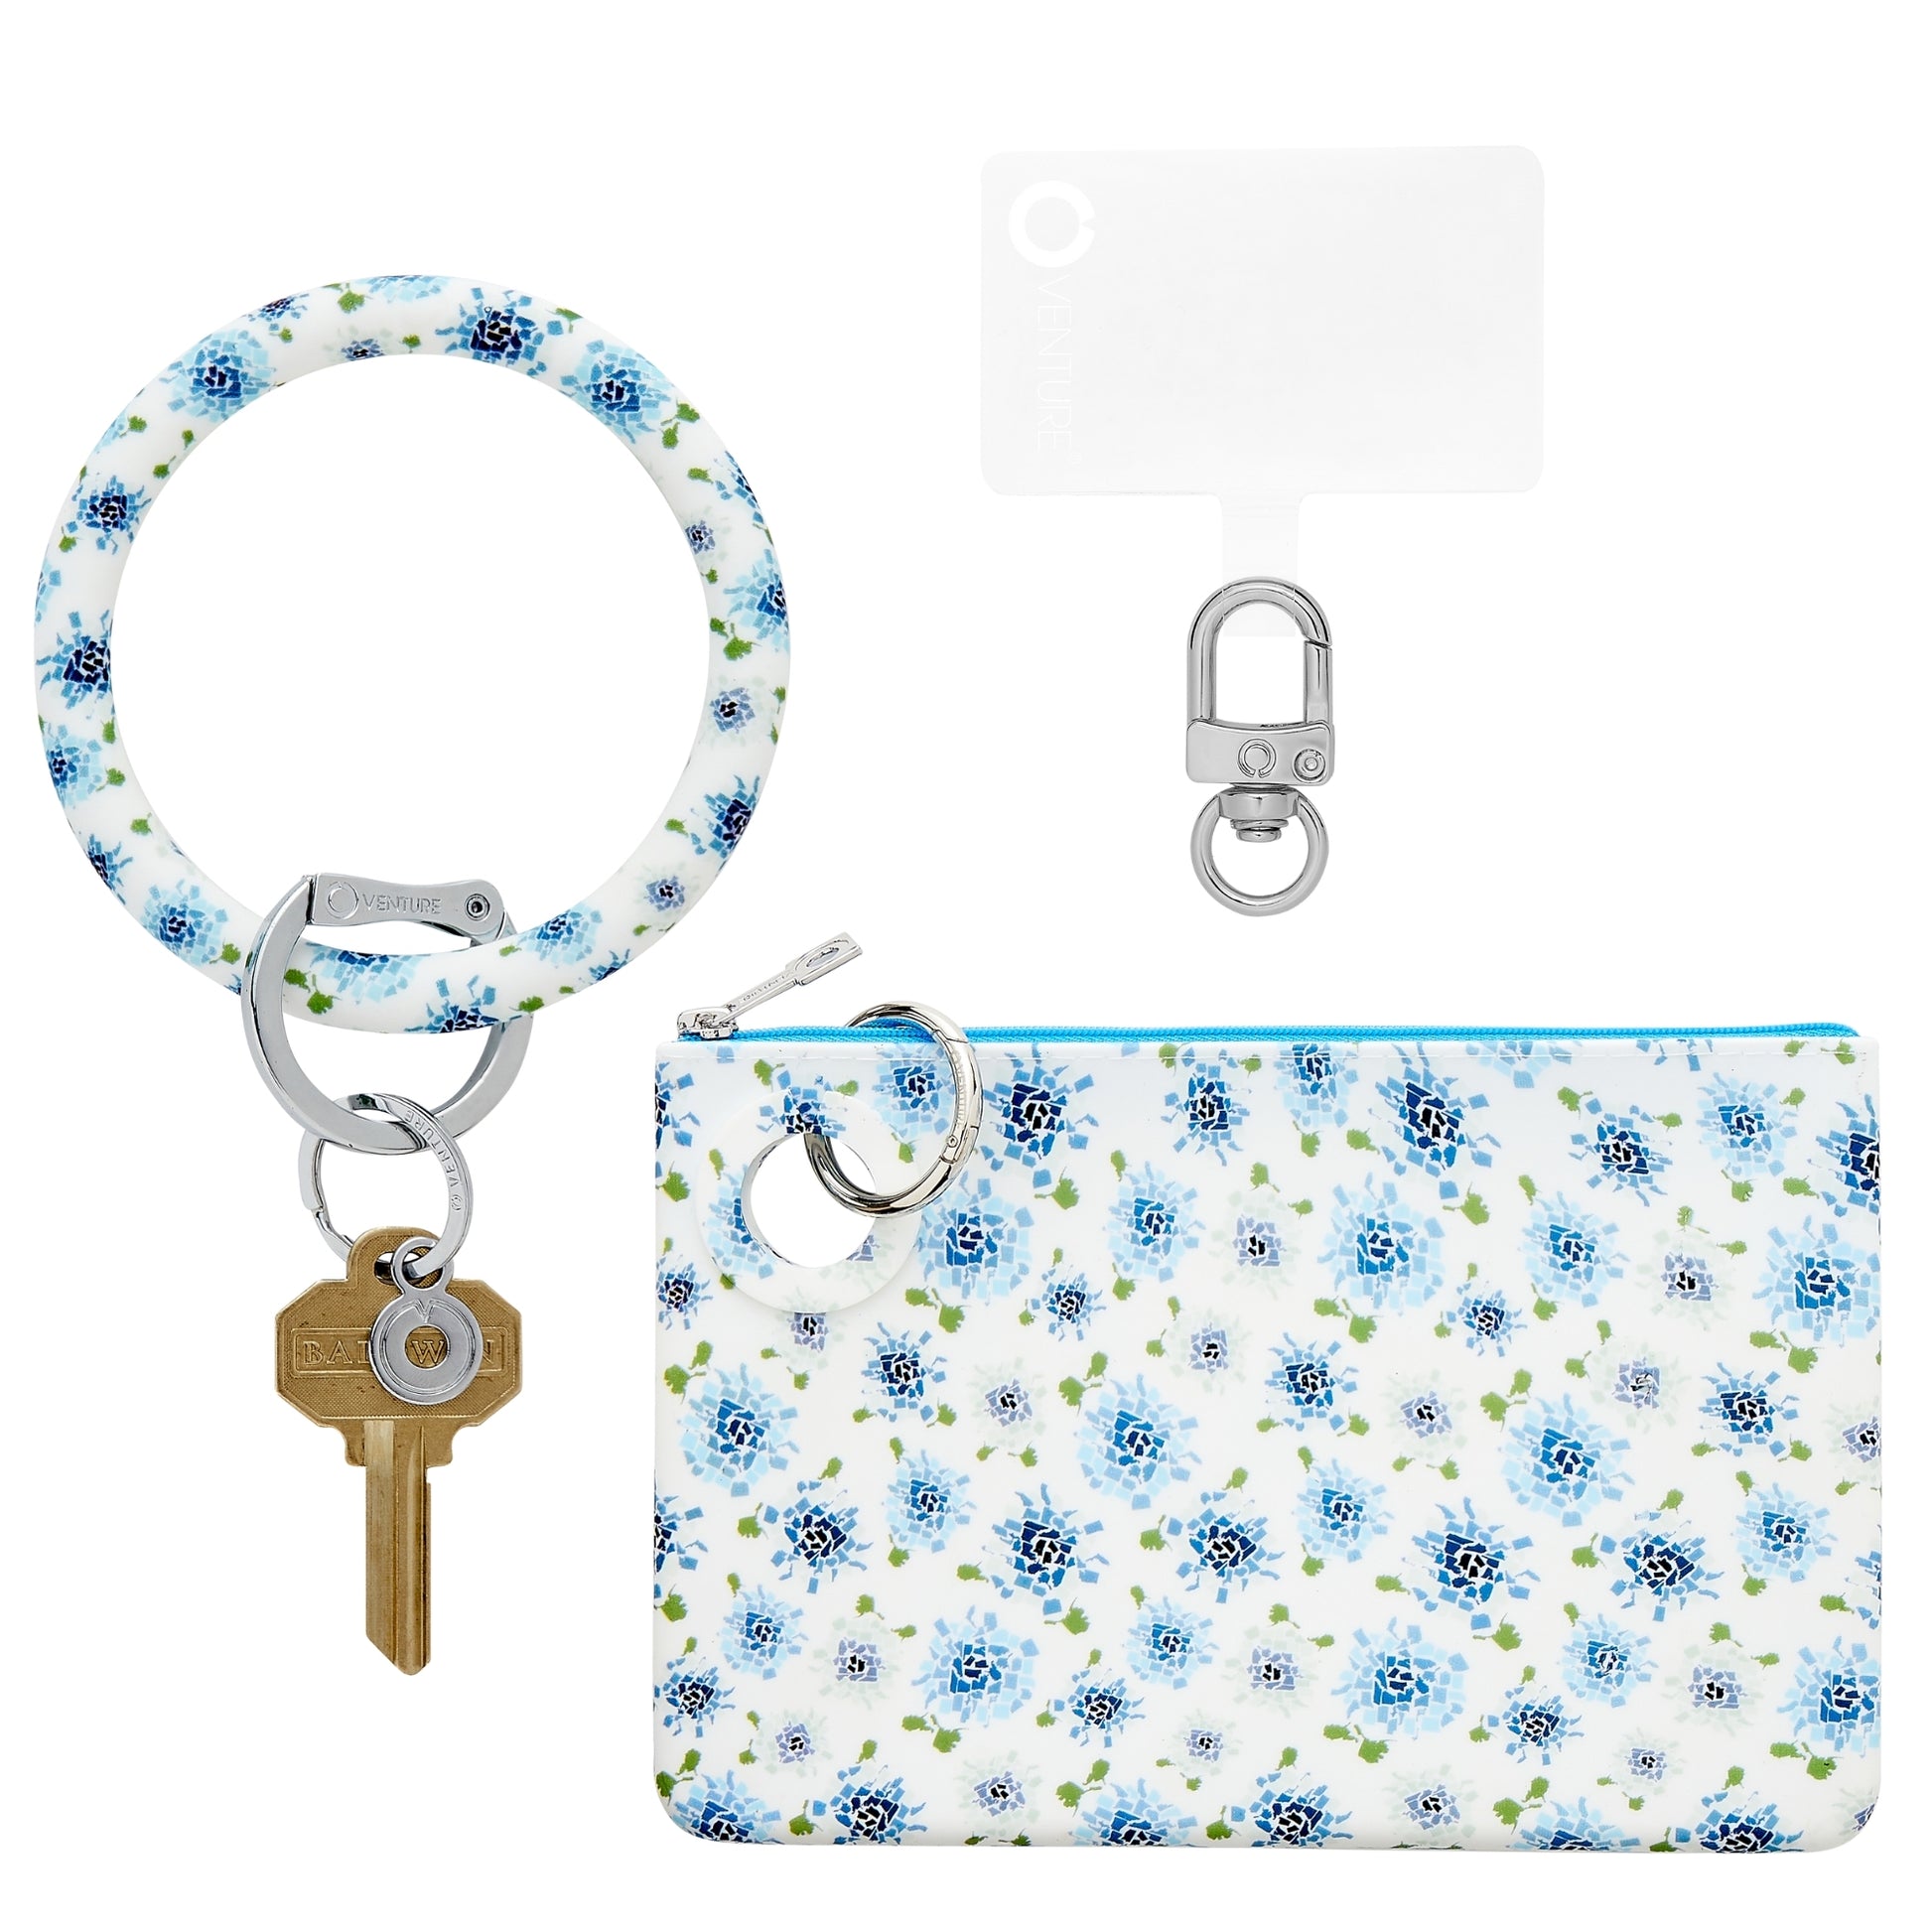 Stylish Large Pouch Wristlet with Phone Holder in blue floral print.